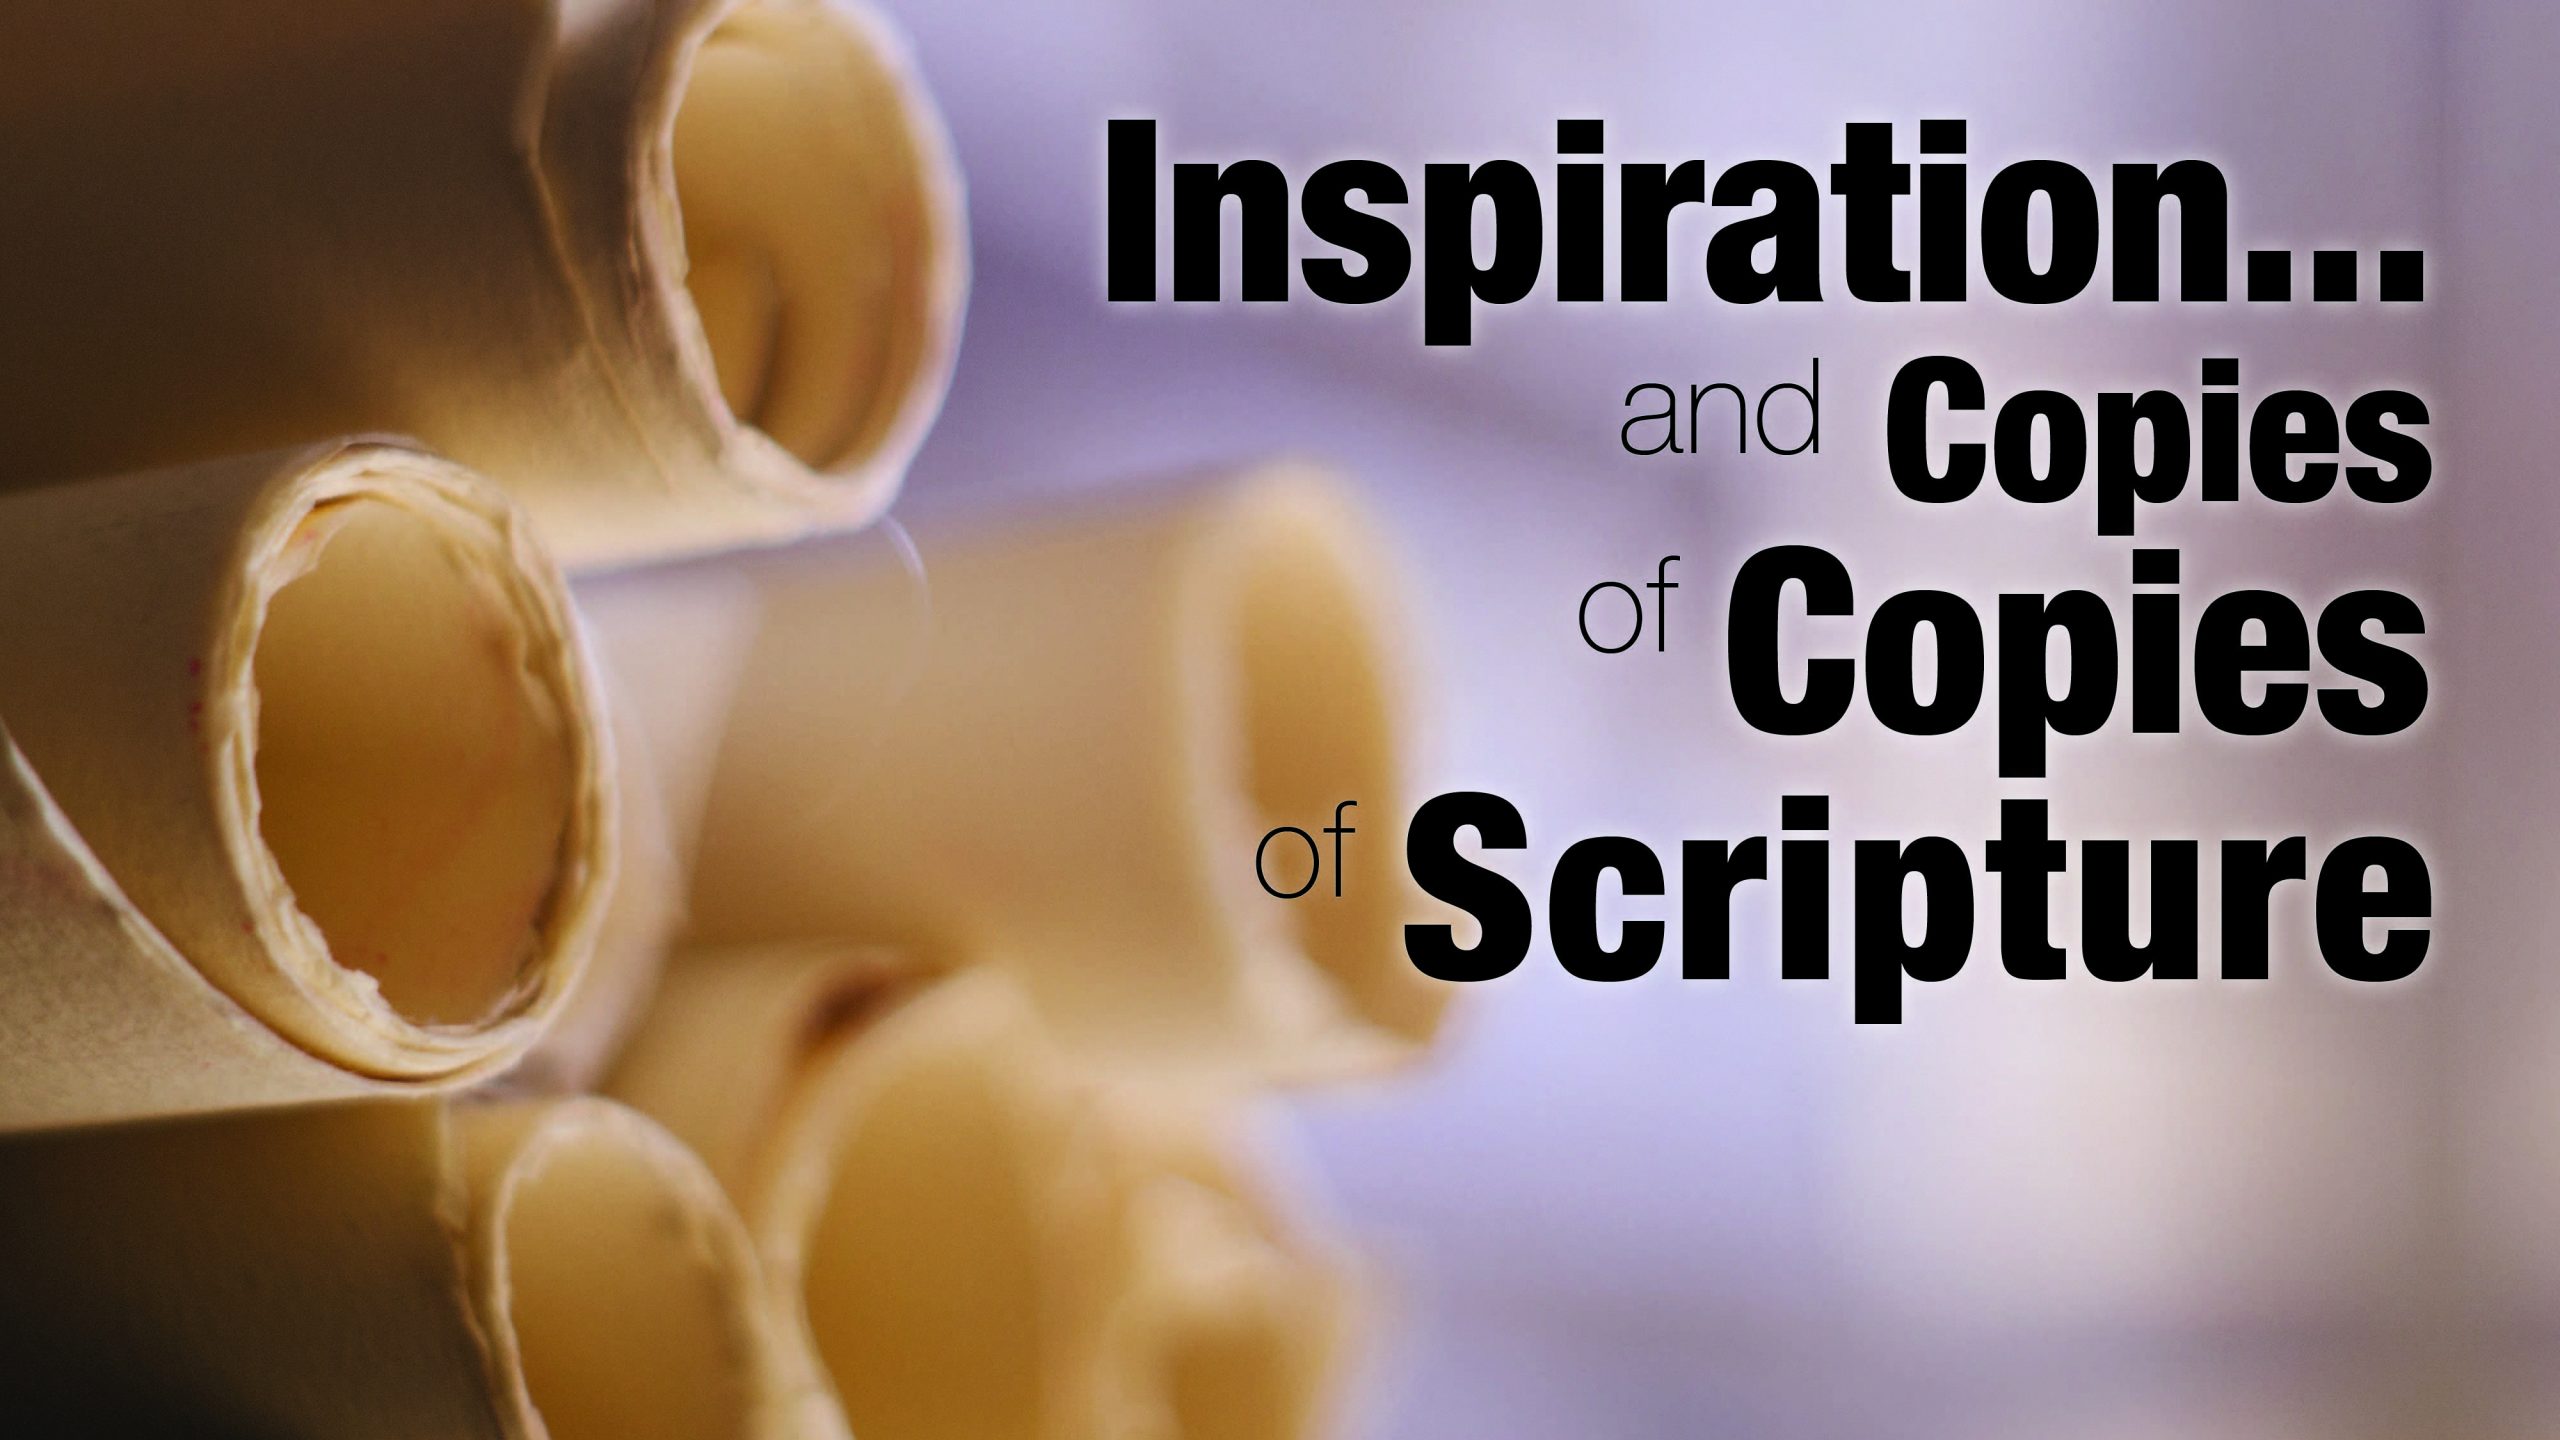 Inspiration and Copies of Copies of Scripture